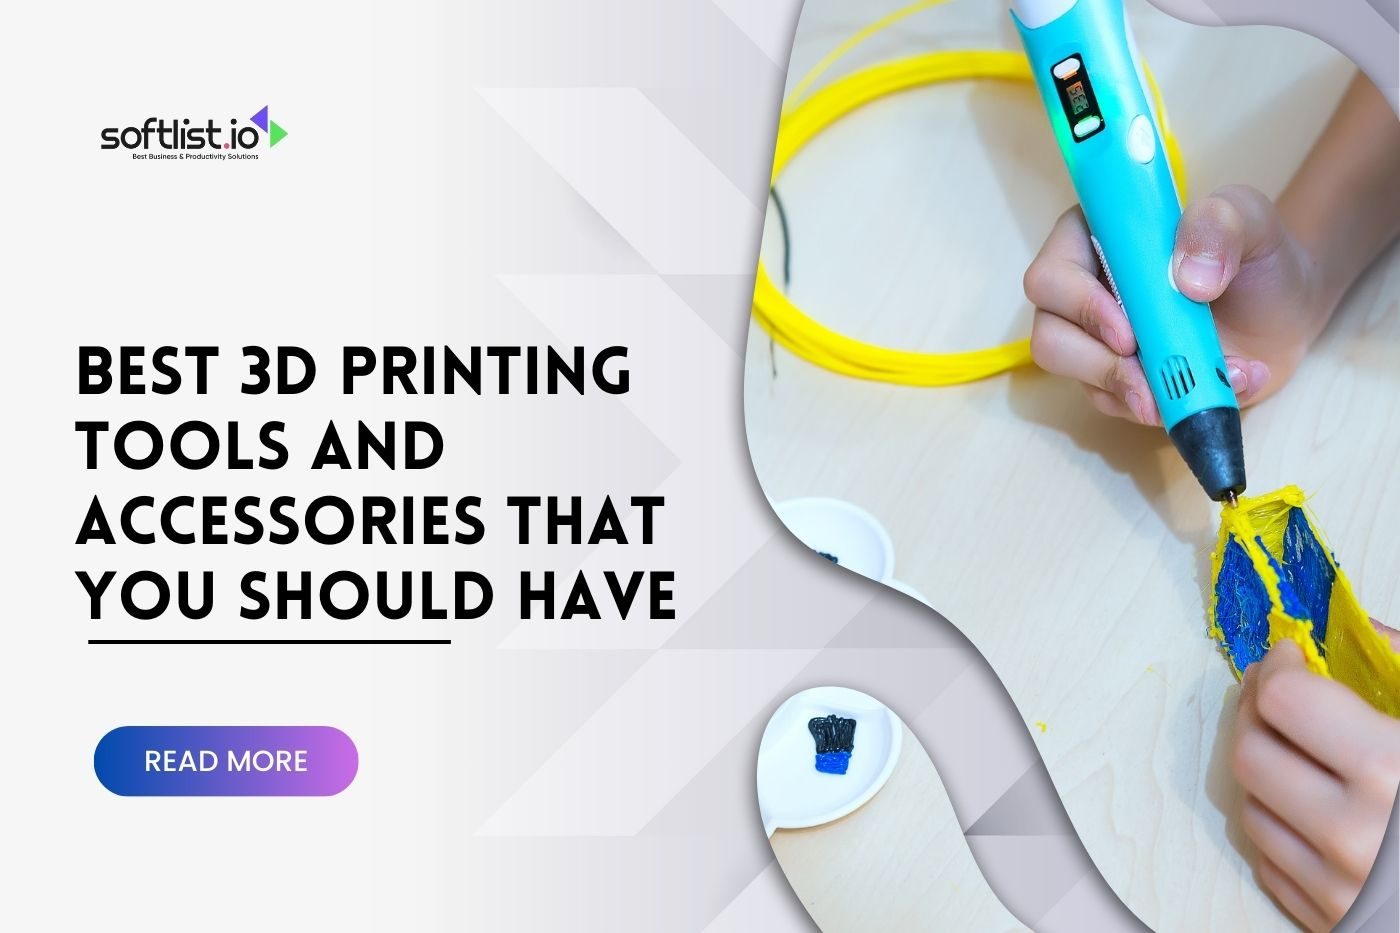 Best 3D Printing Tools and Accessories That You Should Have